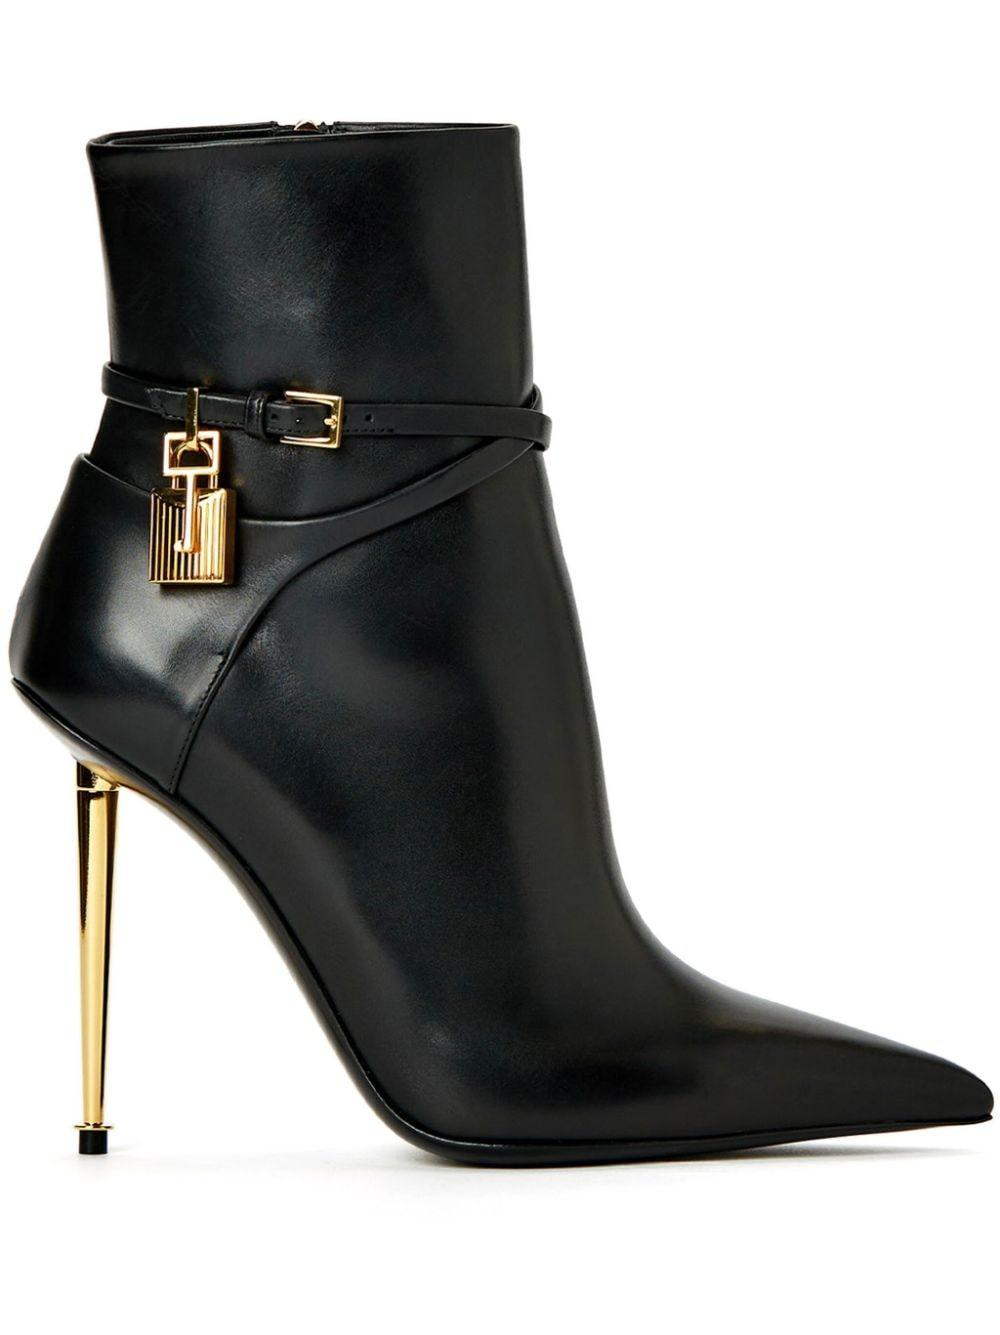 Tom Ford 120mm Padlock Stiletto Boots in Black | Lyst